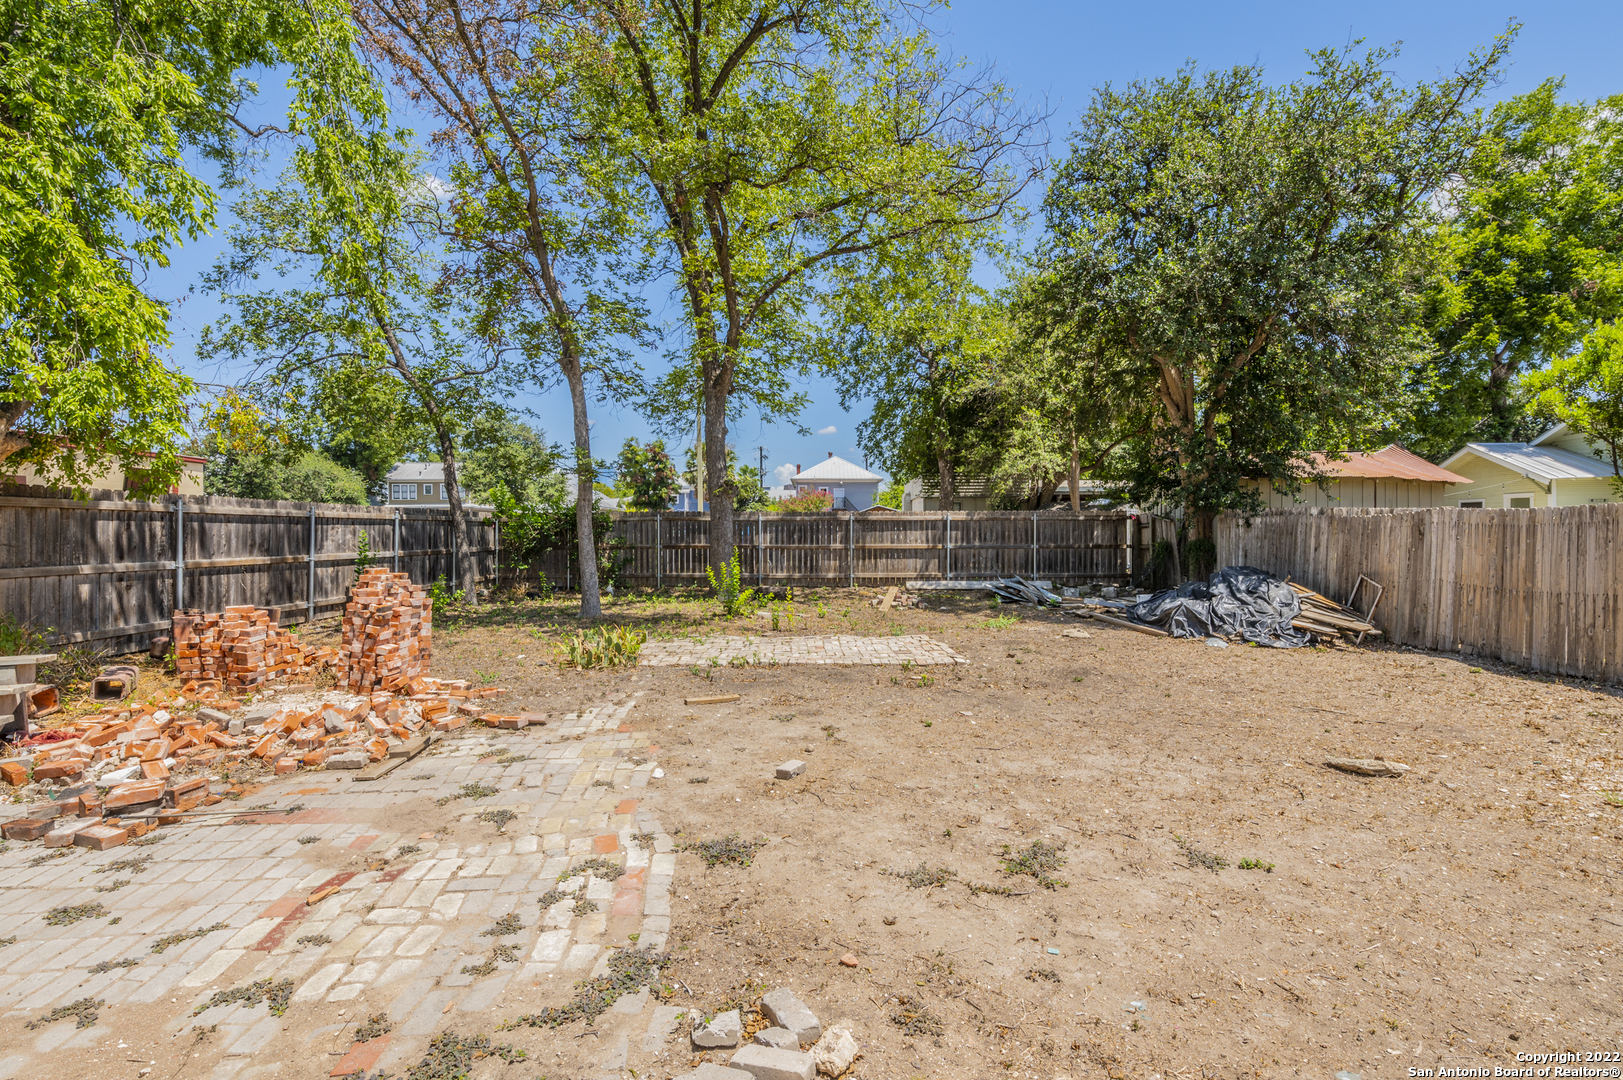 6000 sq.ft. lot, designated RM4 Historic Landmark. You can build a DUPLEX in the back with up to approx. 4000 additional sq.ft. living space for a whopping 5000 sq.ft. total !! 1 minute bike ride to River Walk in King William. Across the street from Beautify San Antonio Park. 2 blocks from HEB.